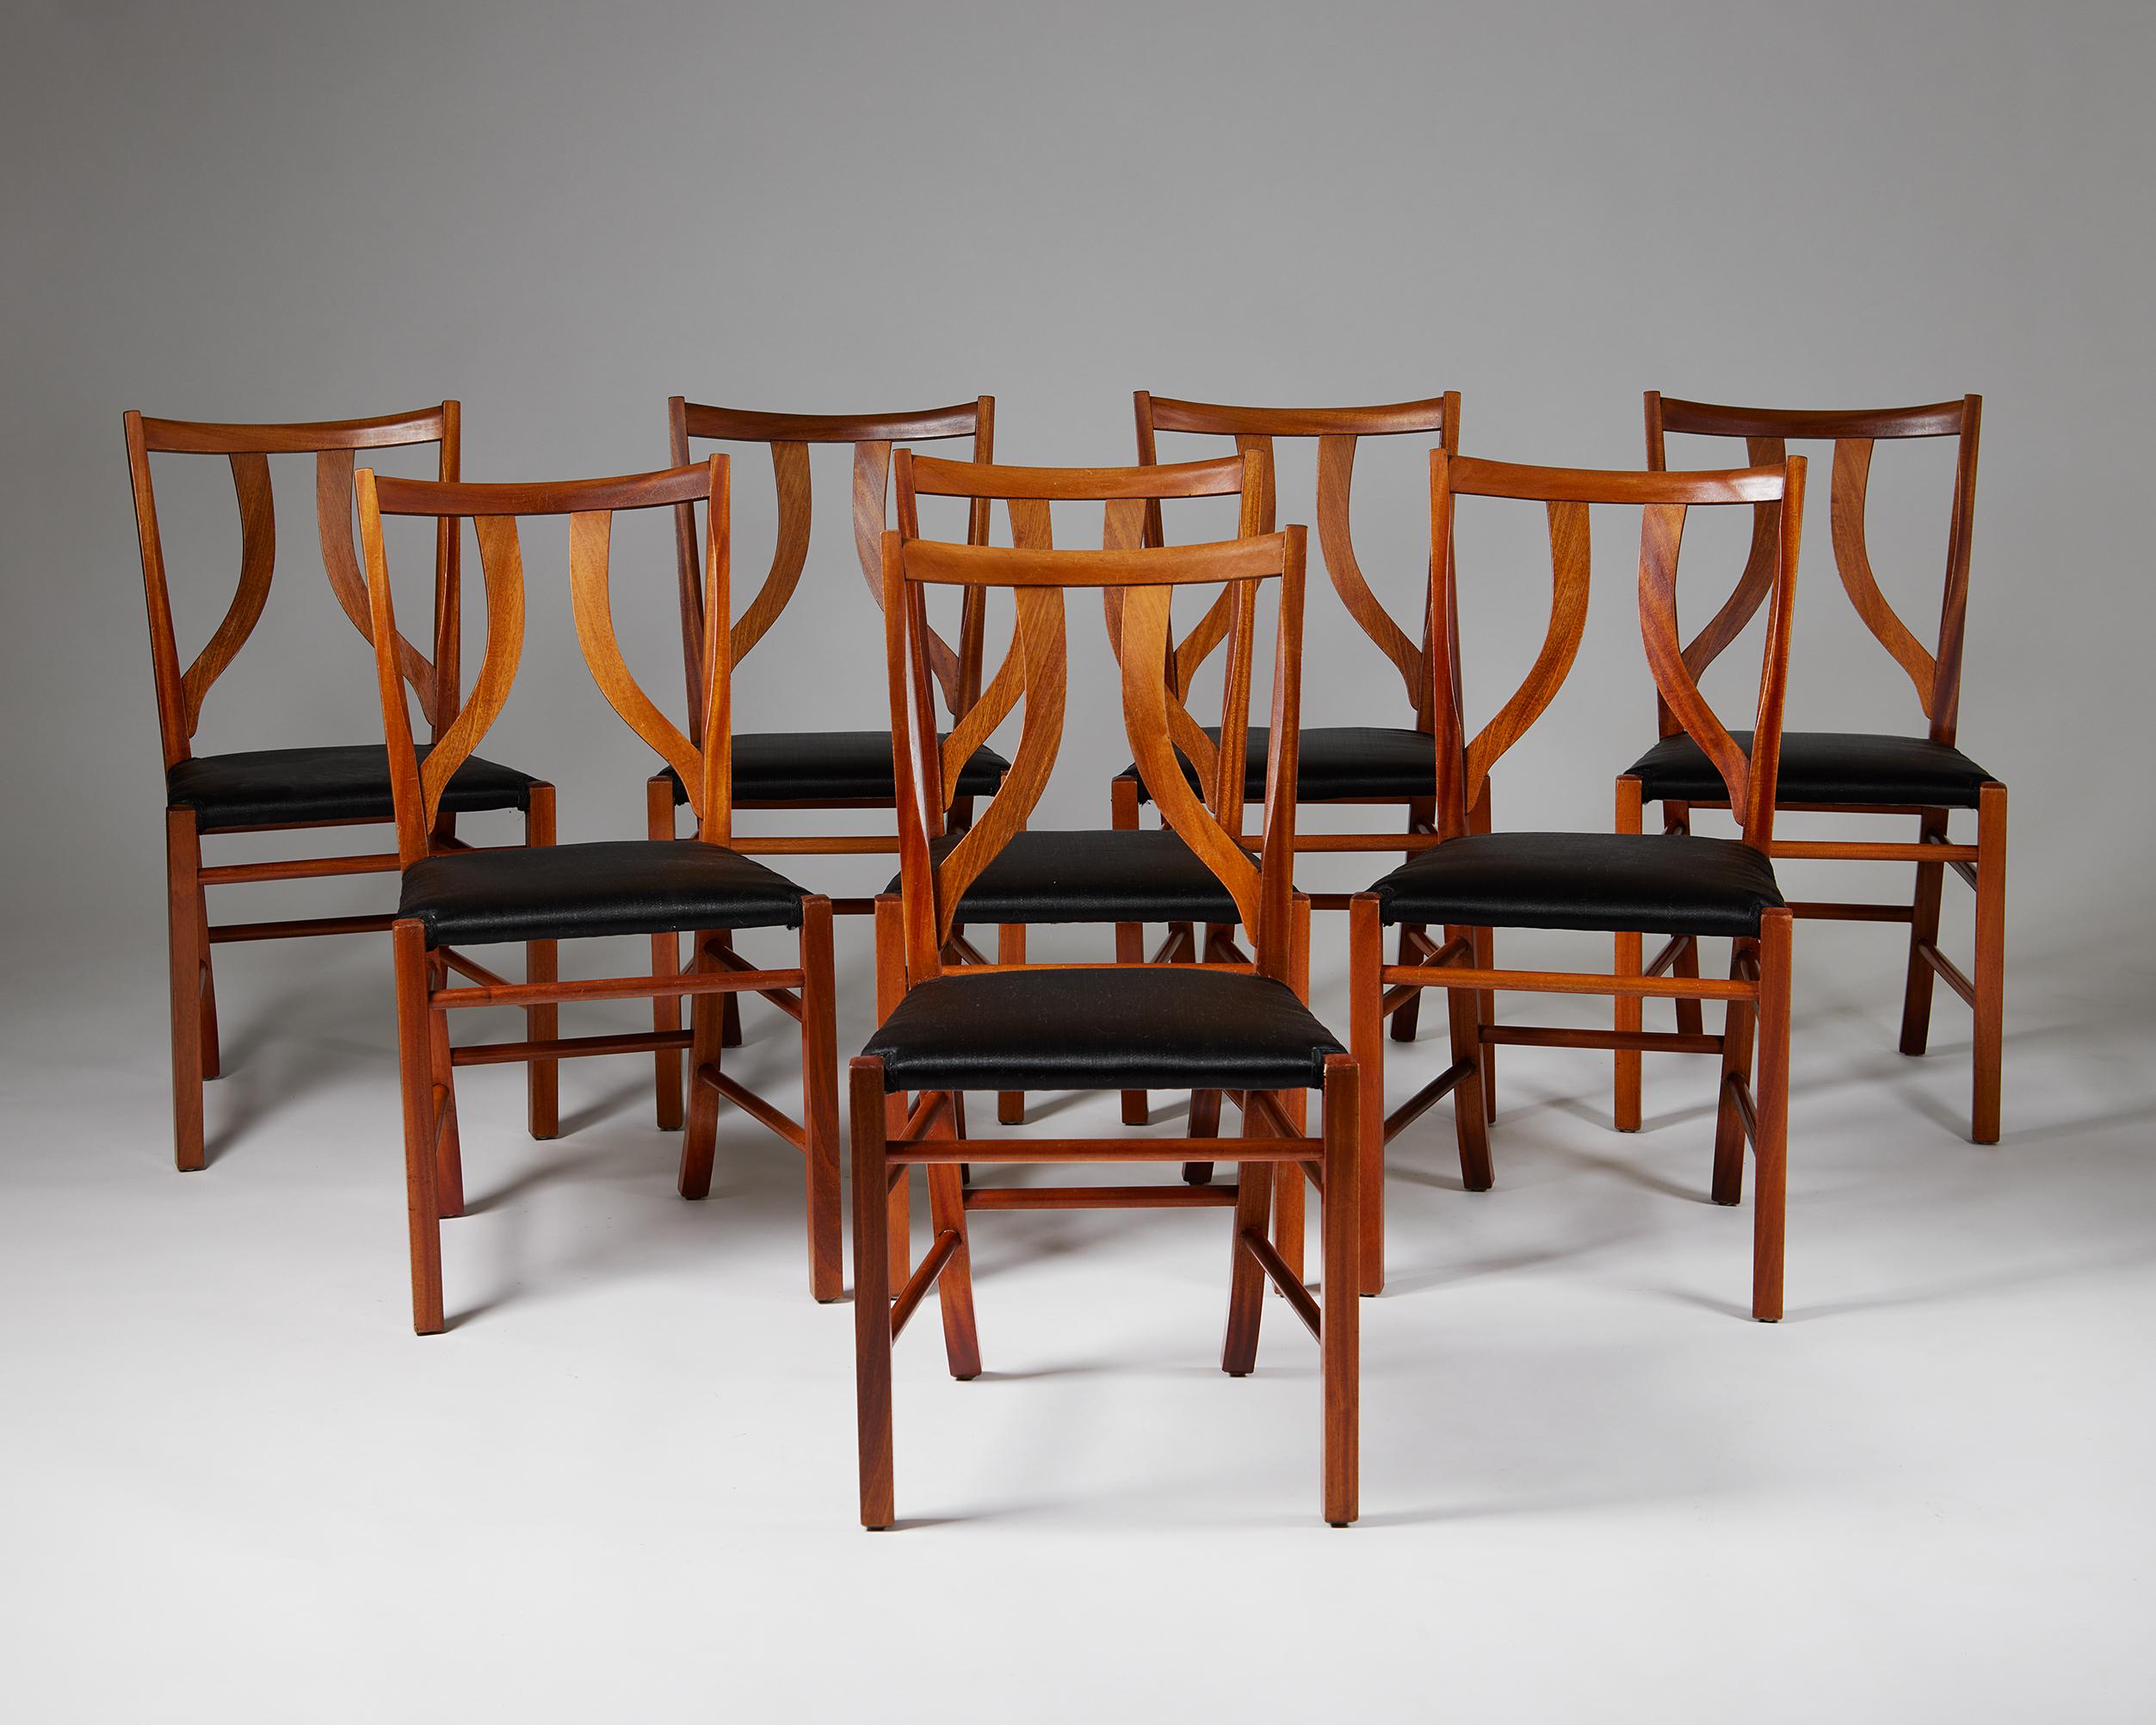 Set of eight dining chairs model 2027 designed by Josef Frank for Svenskt Tenn,
Sweden. 1950s.

Mahogany and horsehair upholstery.

Together with Estrid Ericson and her furnishing company, Svenskt Tenn, Josef Frank developed his characteristic style